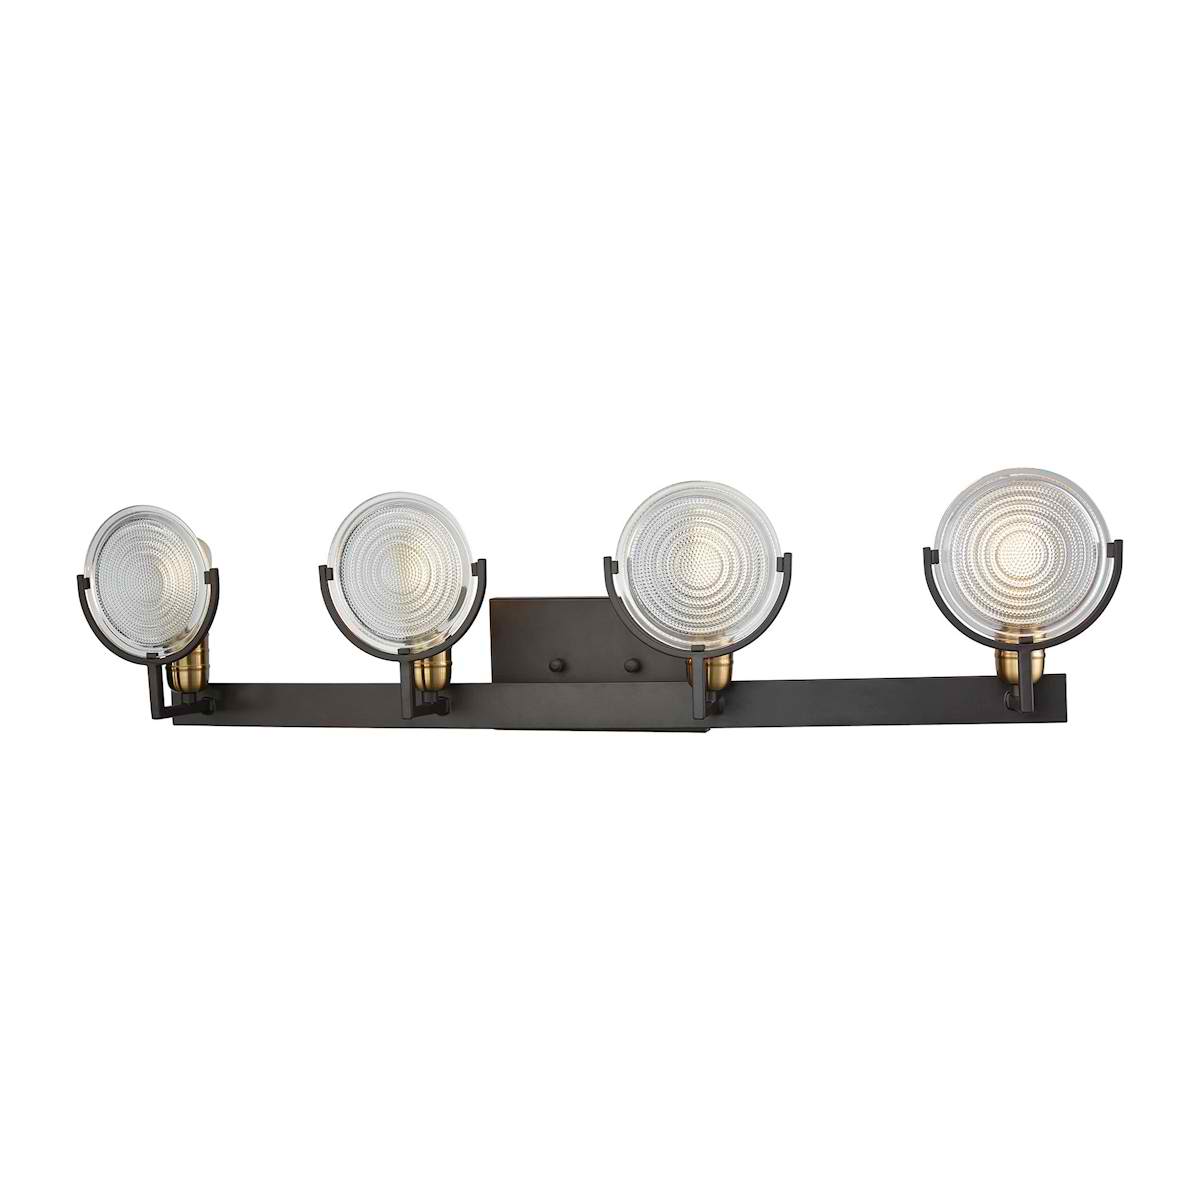 Ocular 4 Light Vanity in Oil Rubbed Bronze with Satin Brass Accents and Clear Railroad Light Glass